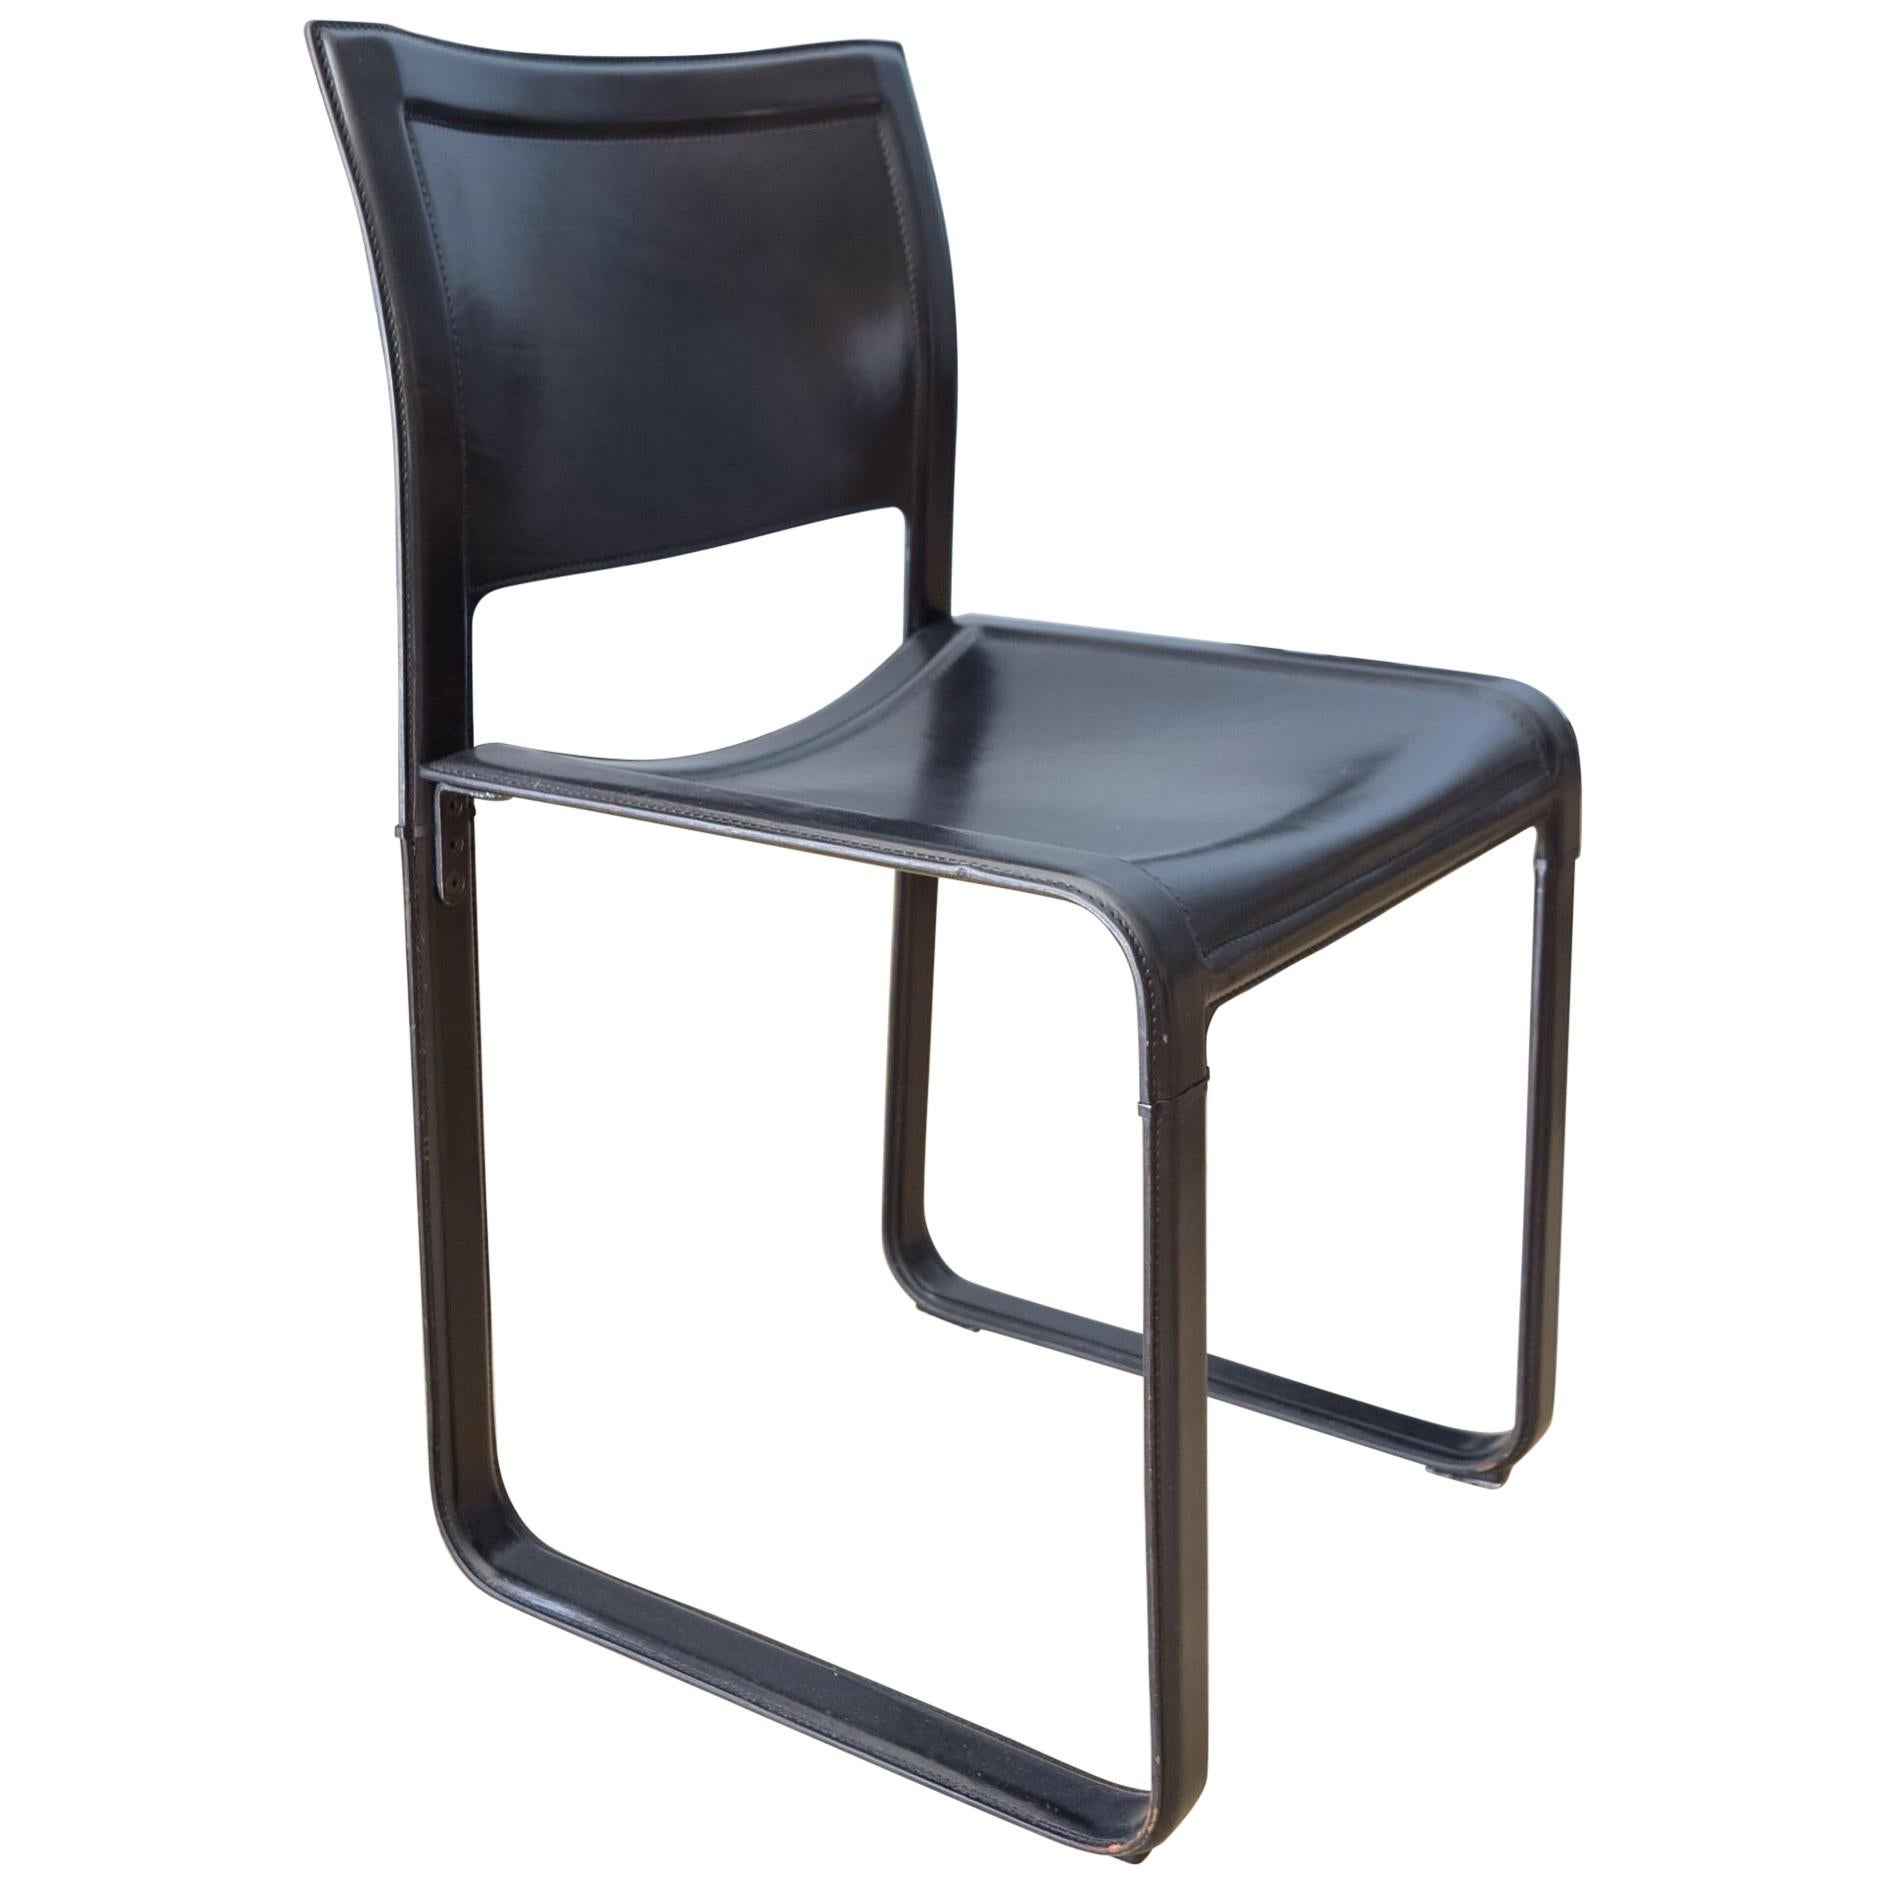 Matteo Grassi Sistina Strap Black Leather Dining Chair, 3 Chairs Available For Sale